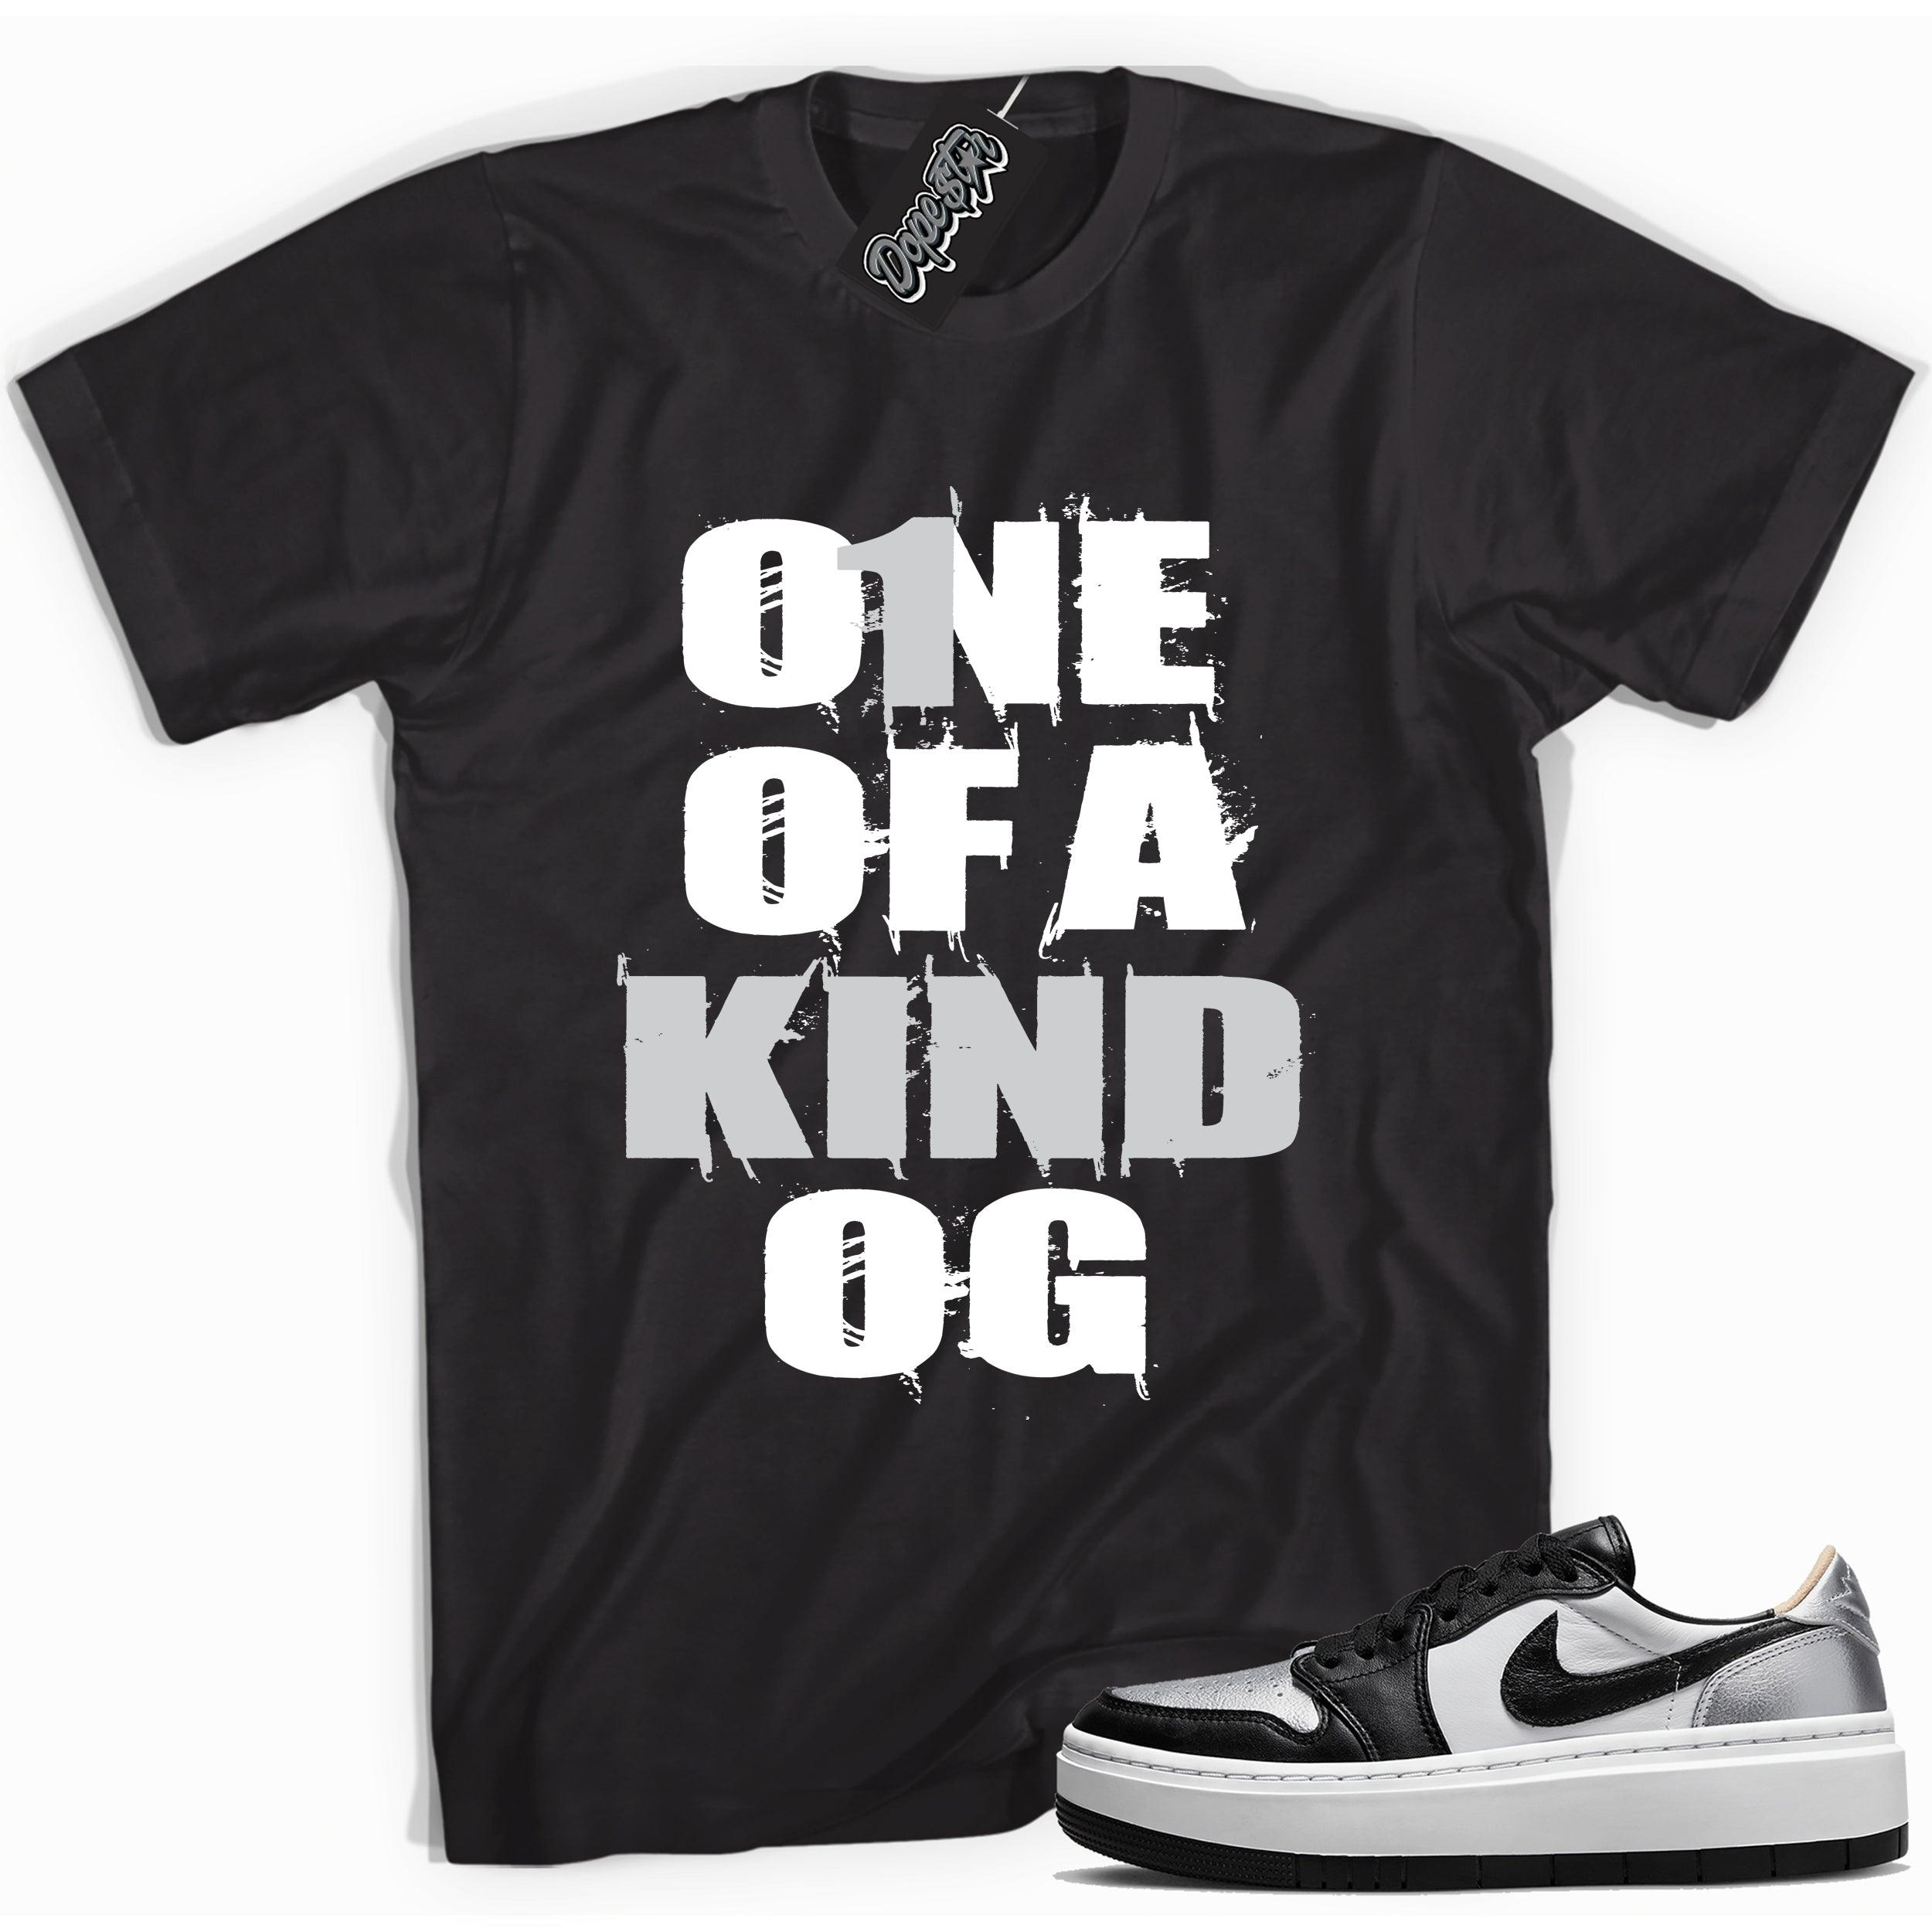 Cool black graphic tee with 'one of a kind' print, that perfectly matches Air Jordan 1 Elevate Low SE Silver Toe sneakers.